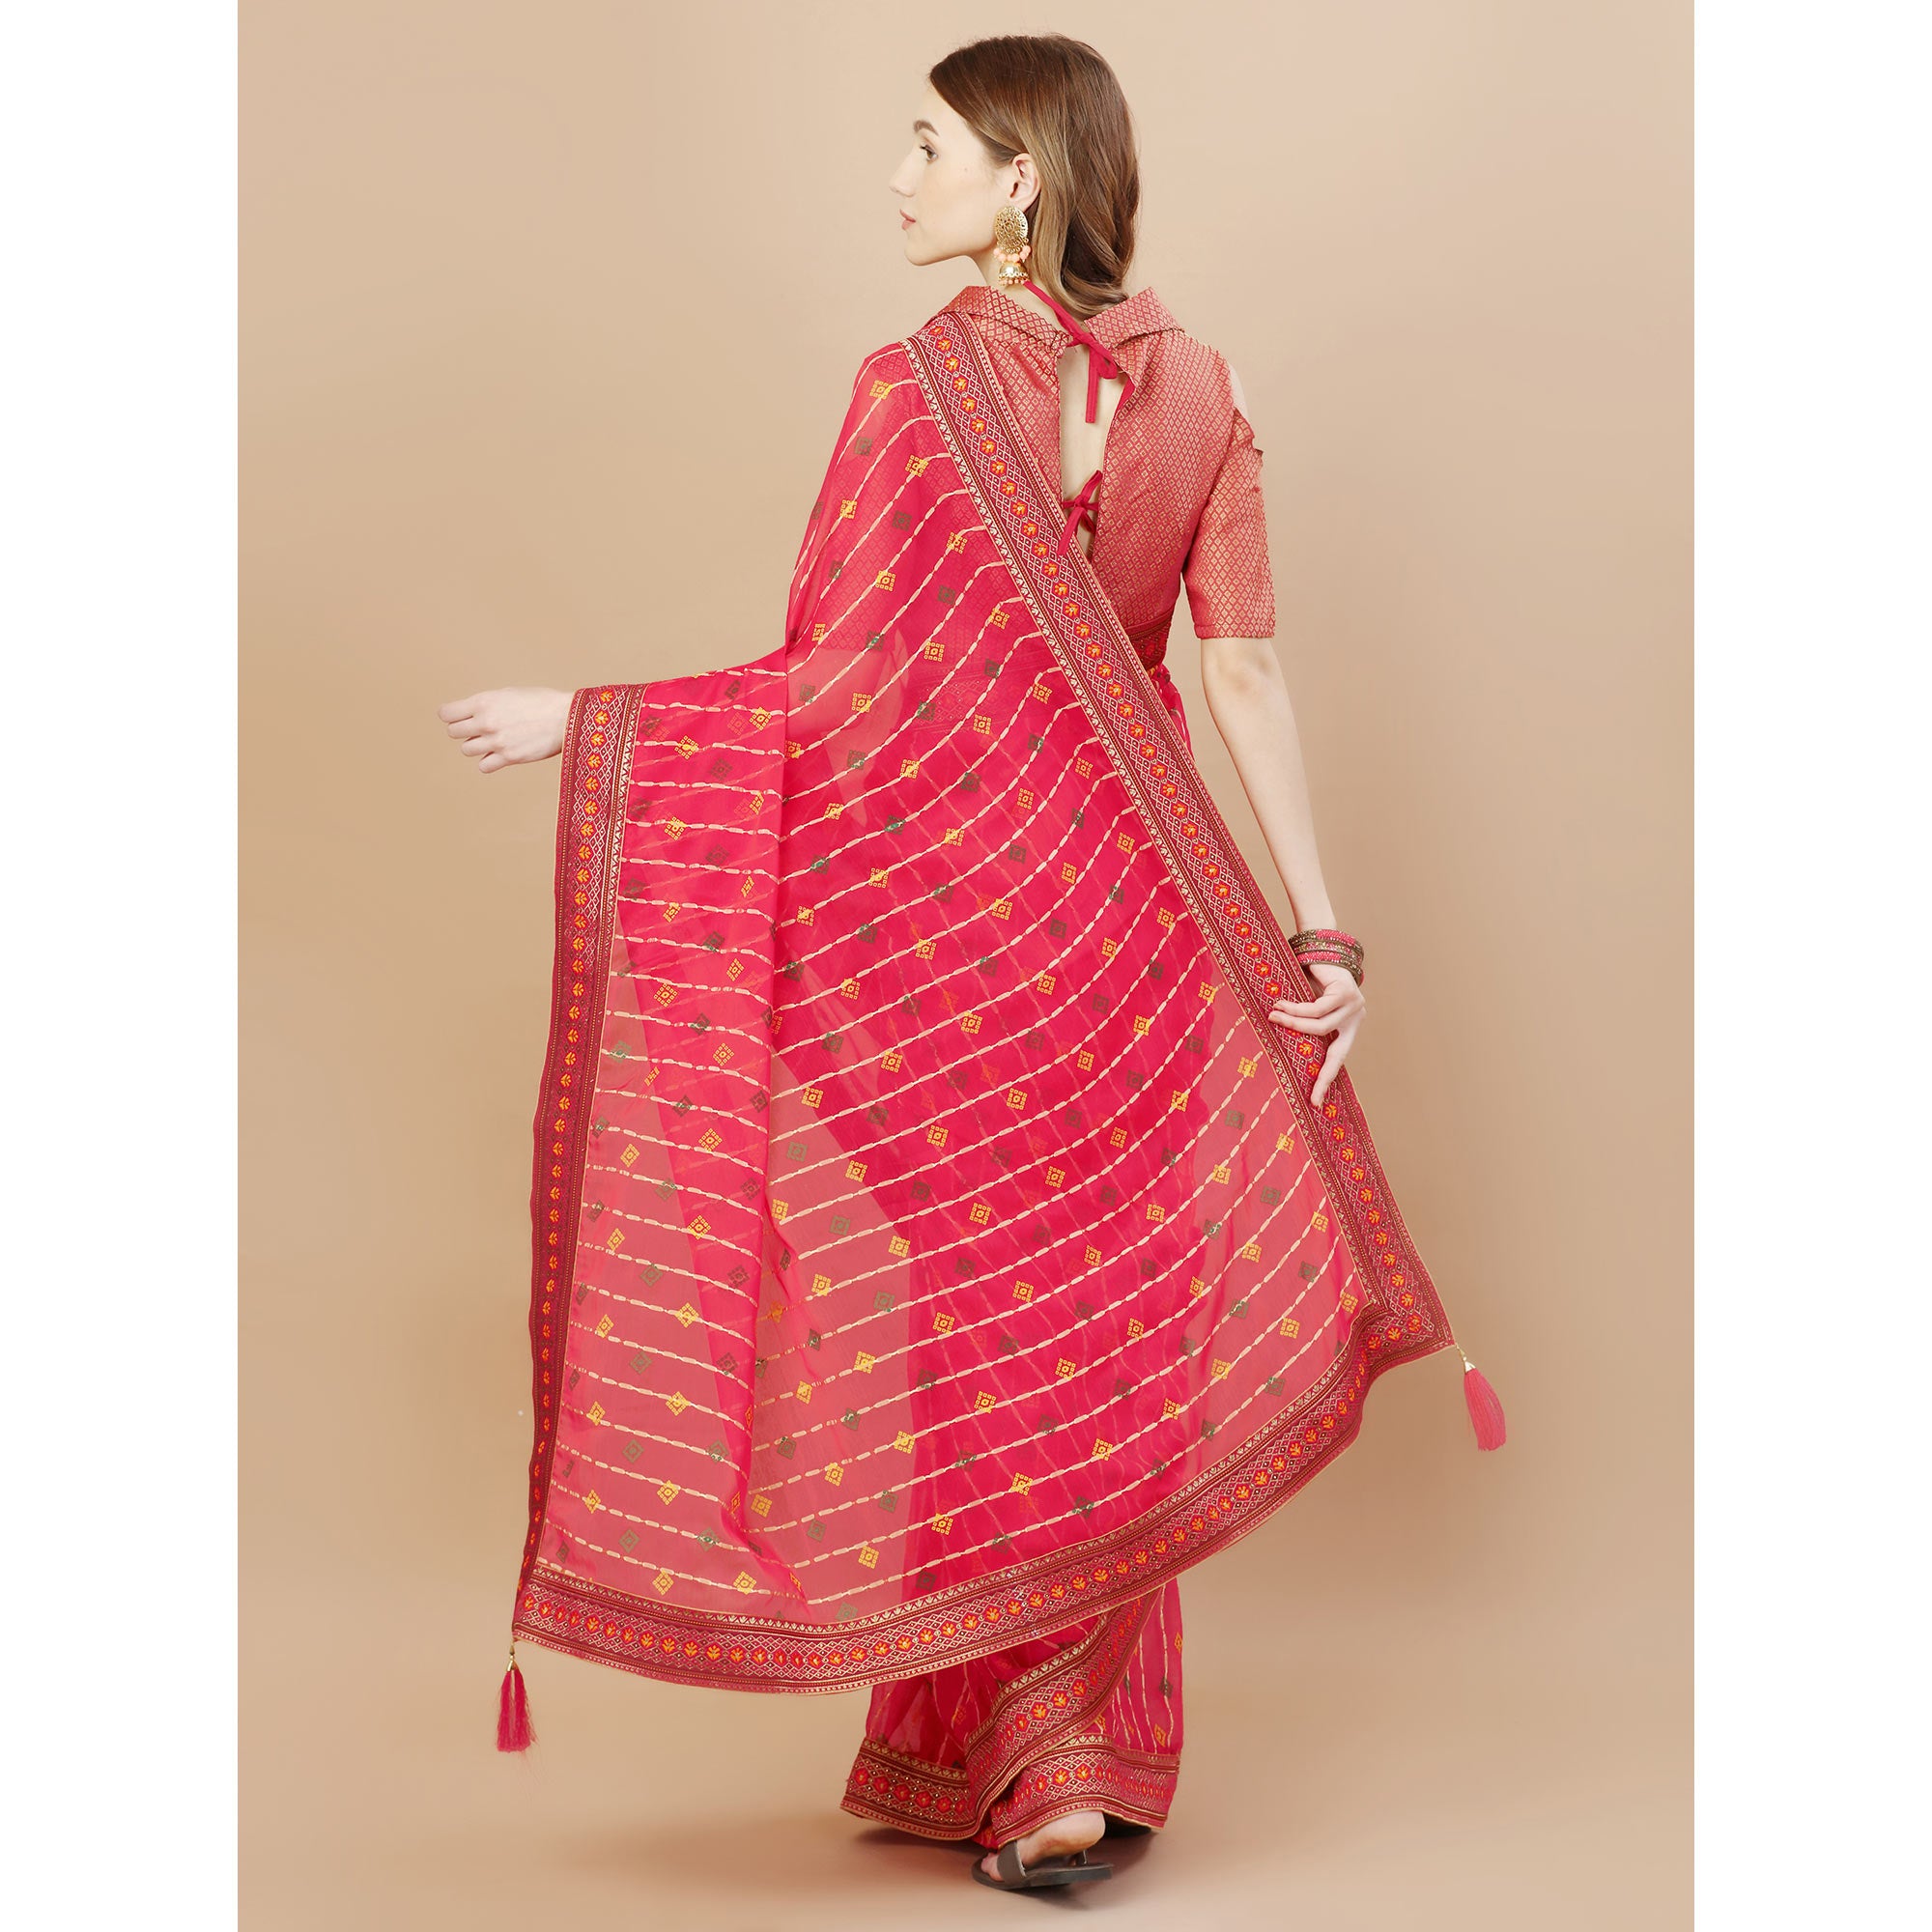 Pink Foil Printed Chiffon Saree With Lace Border